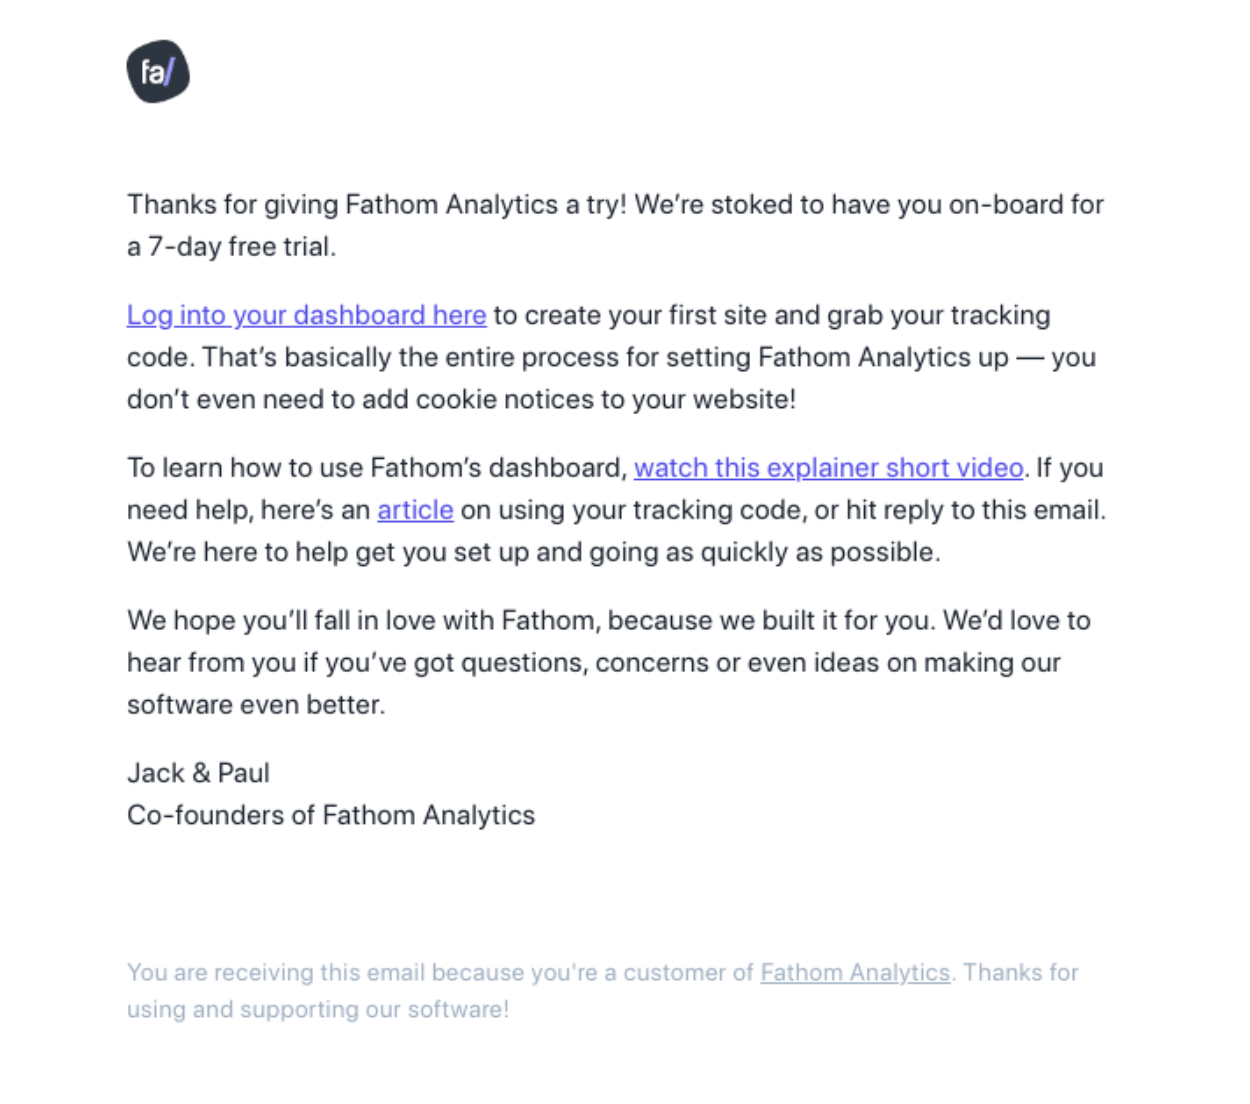 SaaS Plain Text Emails: Screenshot of Fathom Analytics' nearly plain text email